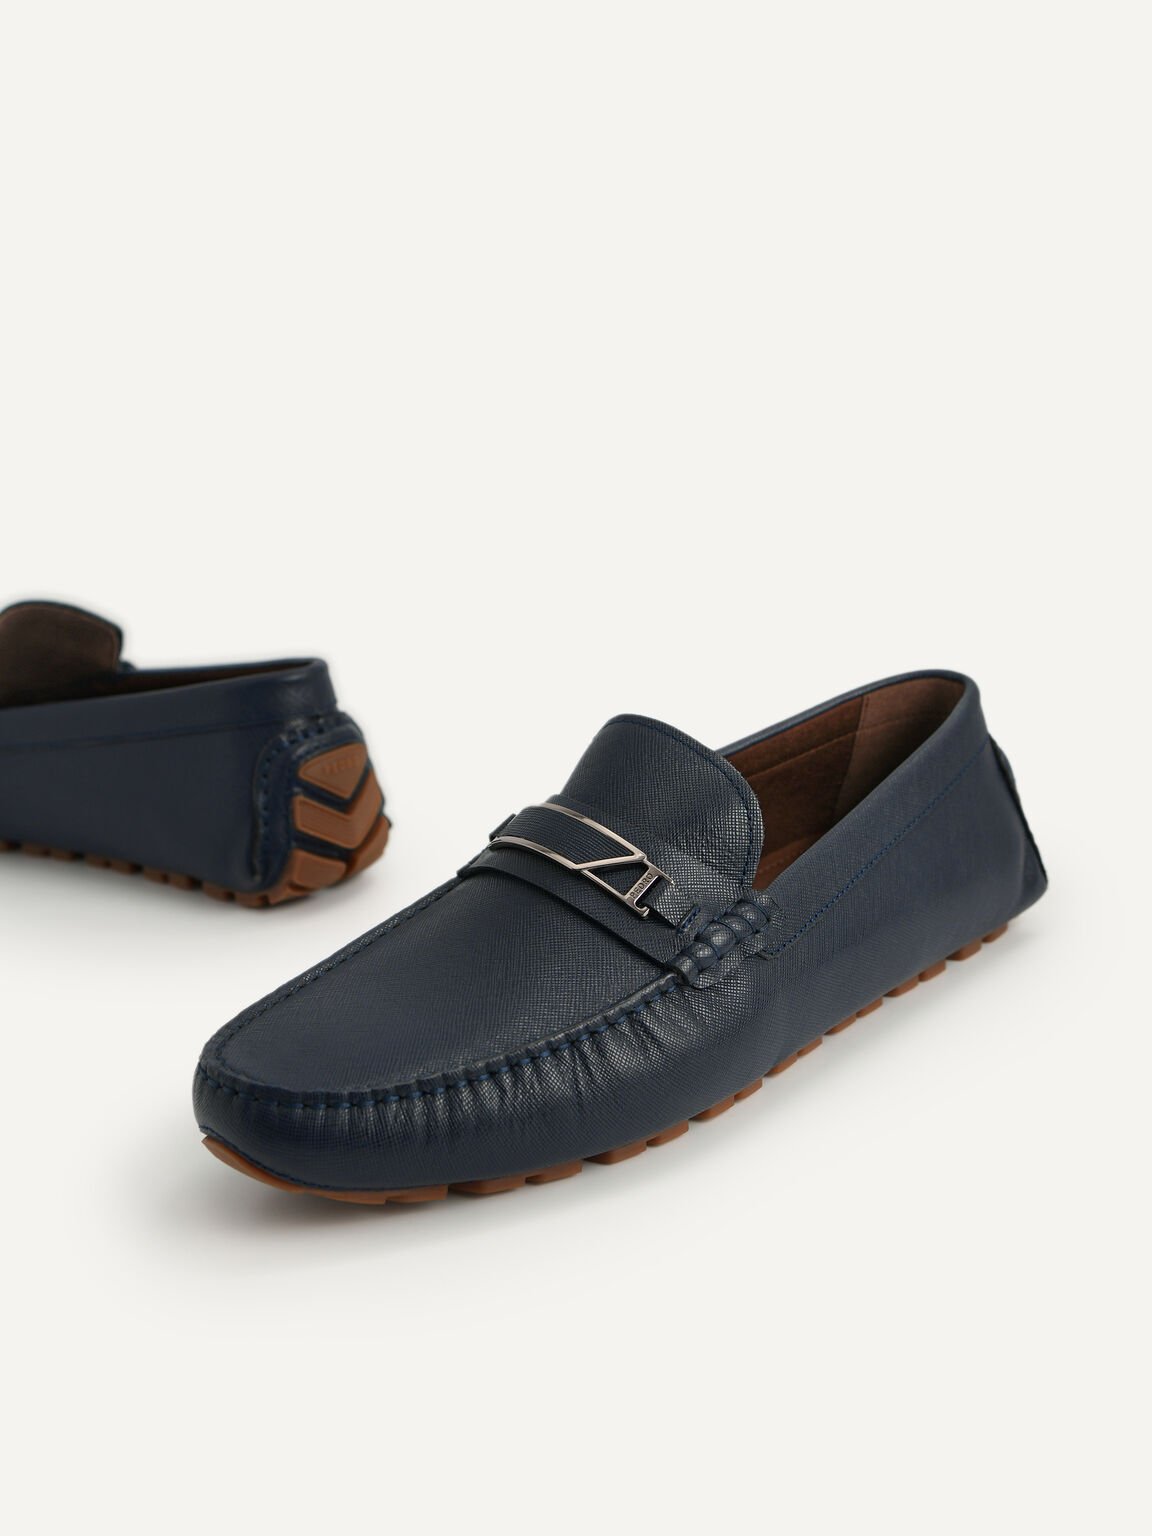 Leather Moccasins with Metal Bit, Navy, hi-res